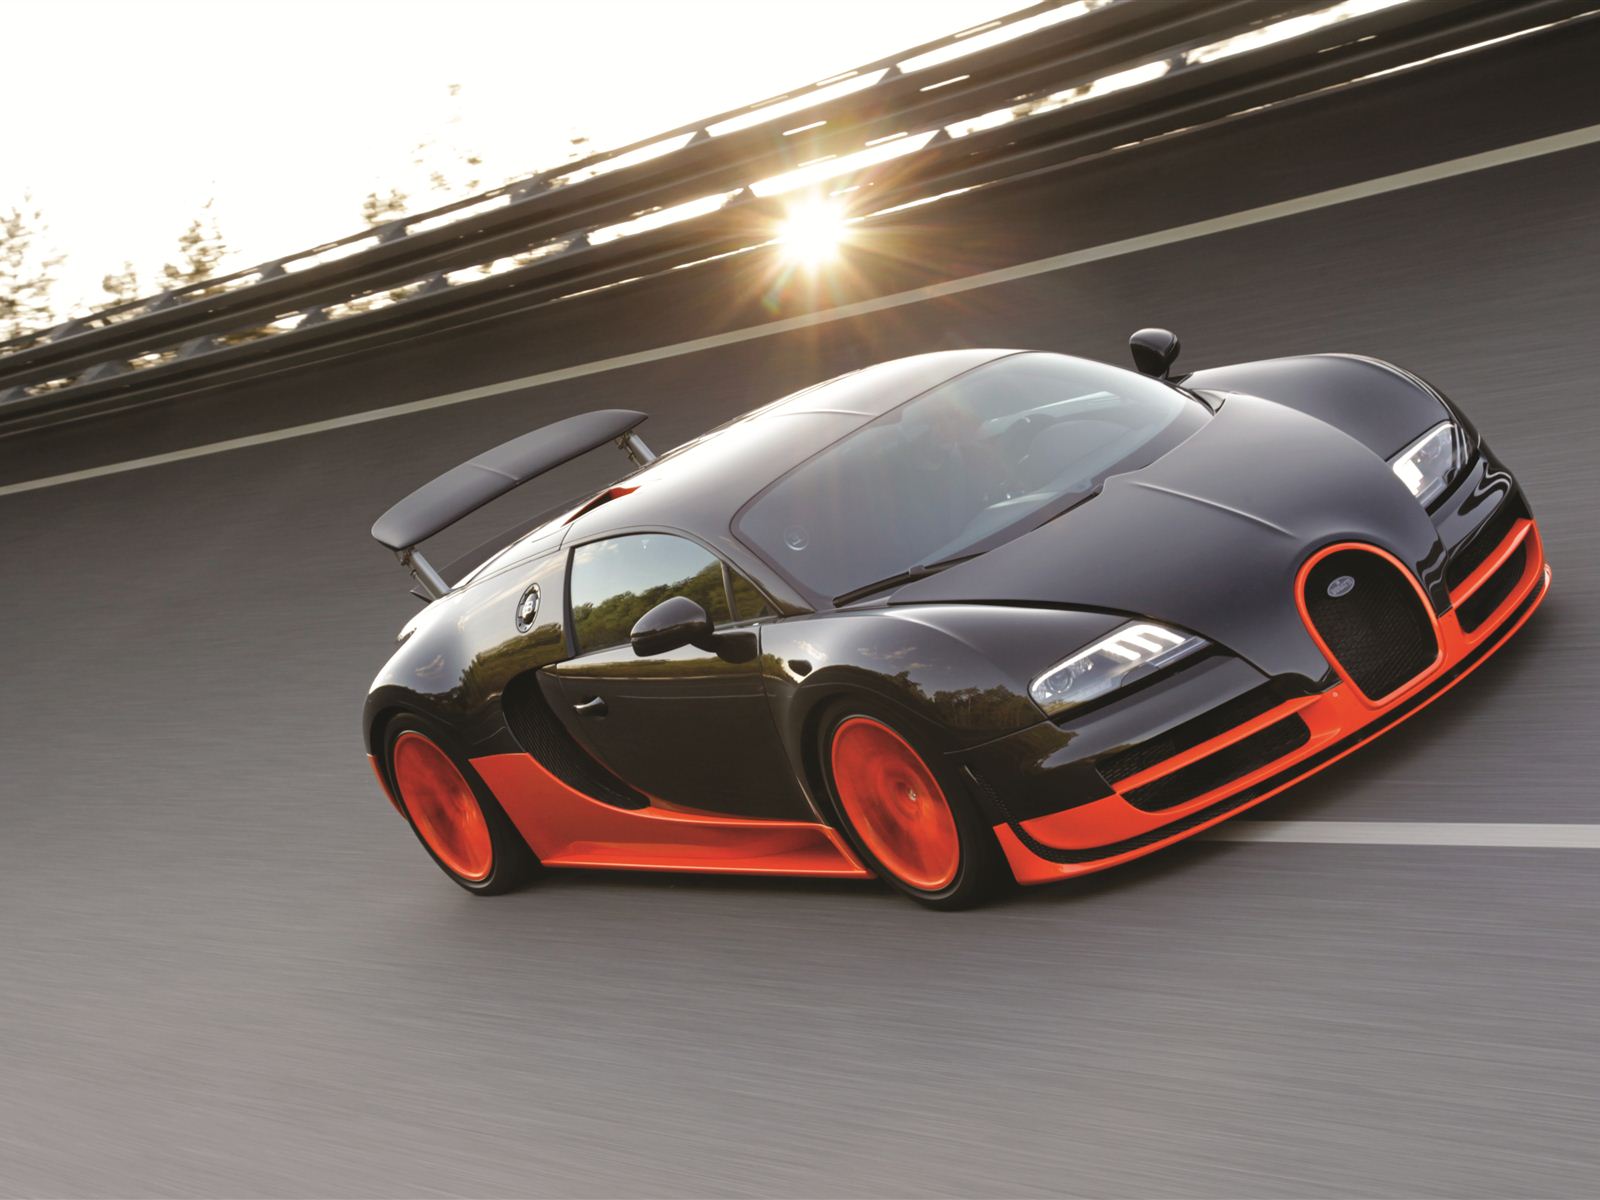 The Bugatti Super Sport is a 2 door coupe with a starting MSRP of 2,250,880Top Speed 267 MPH, 0-60 2.2 in Seconds